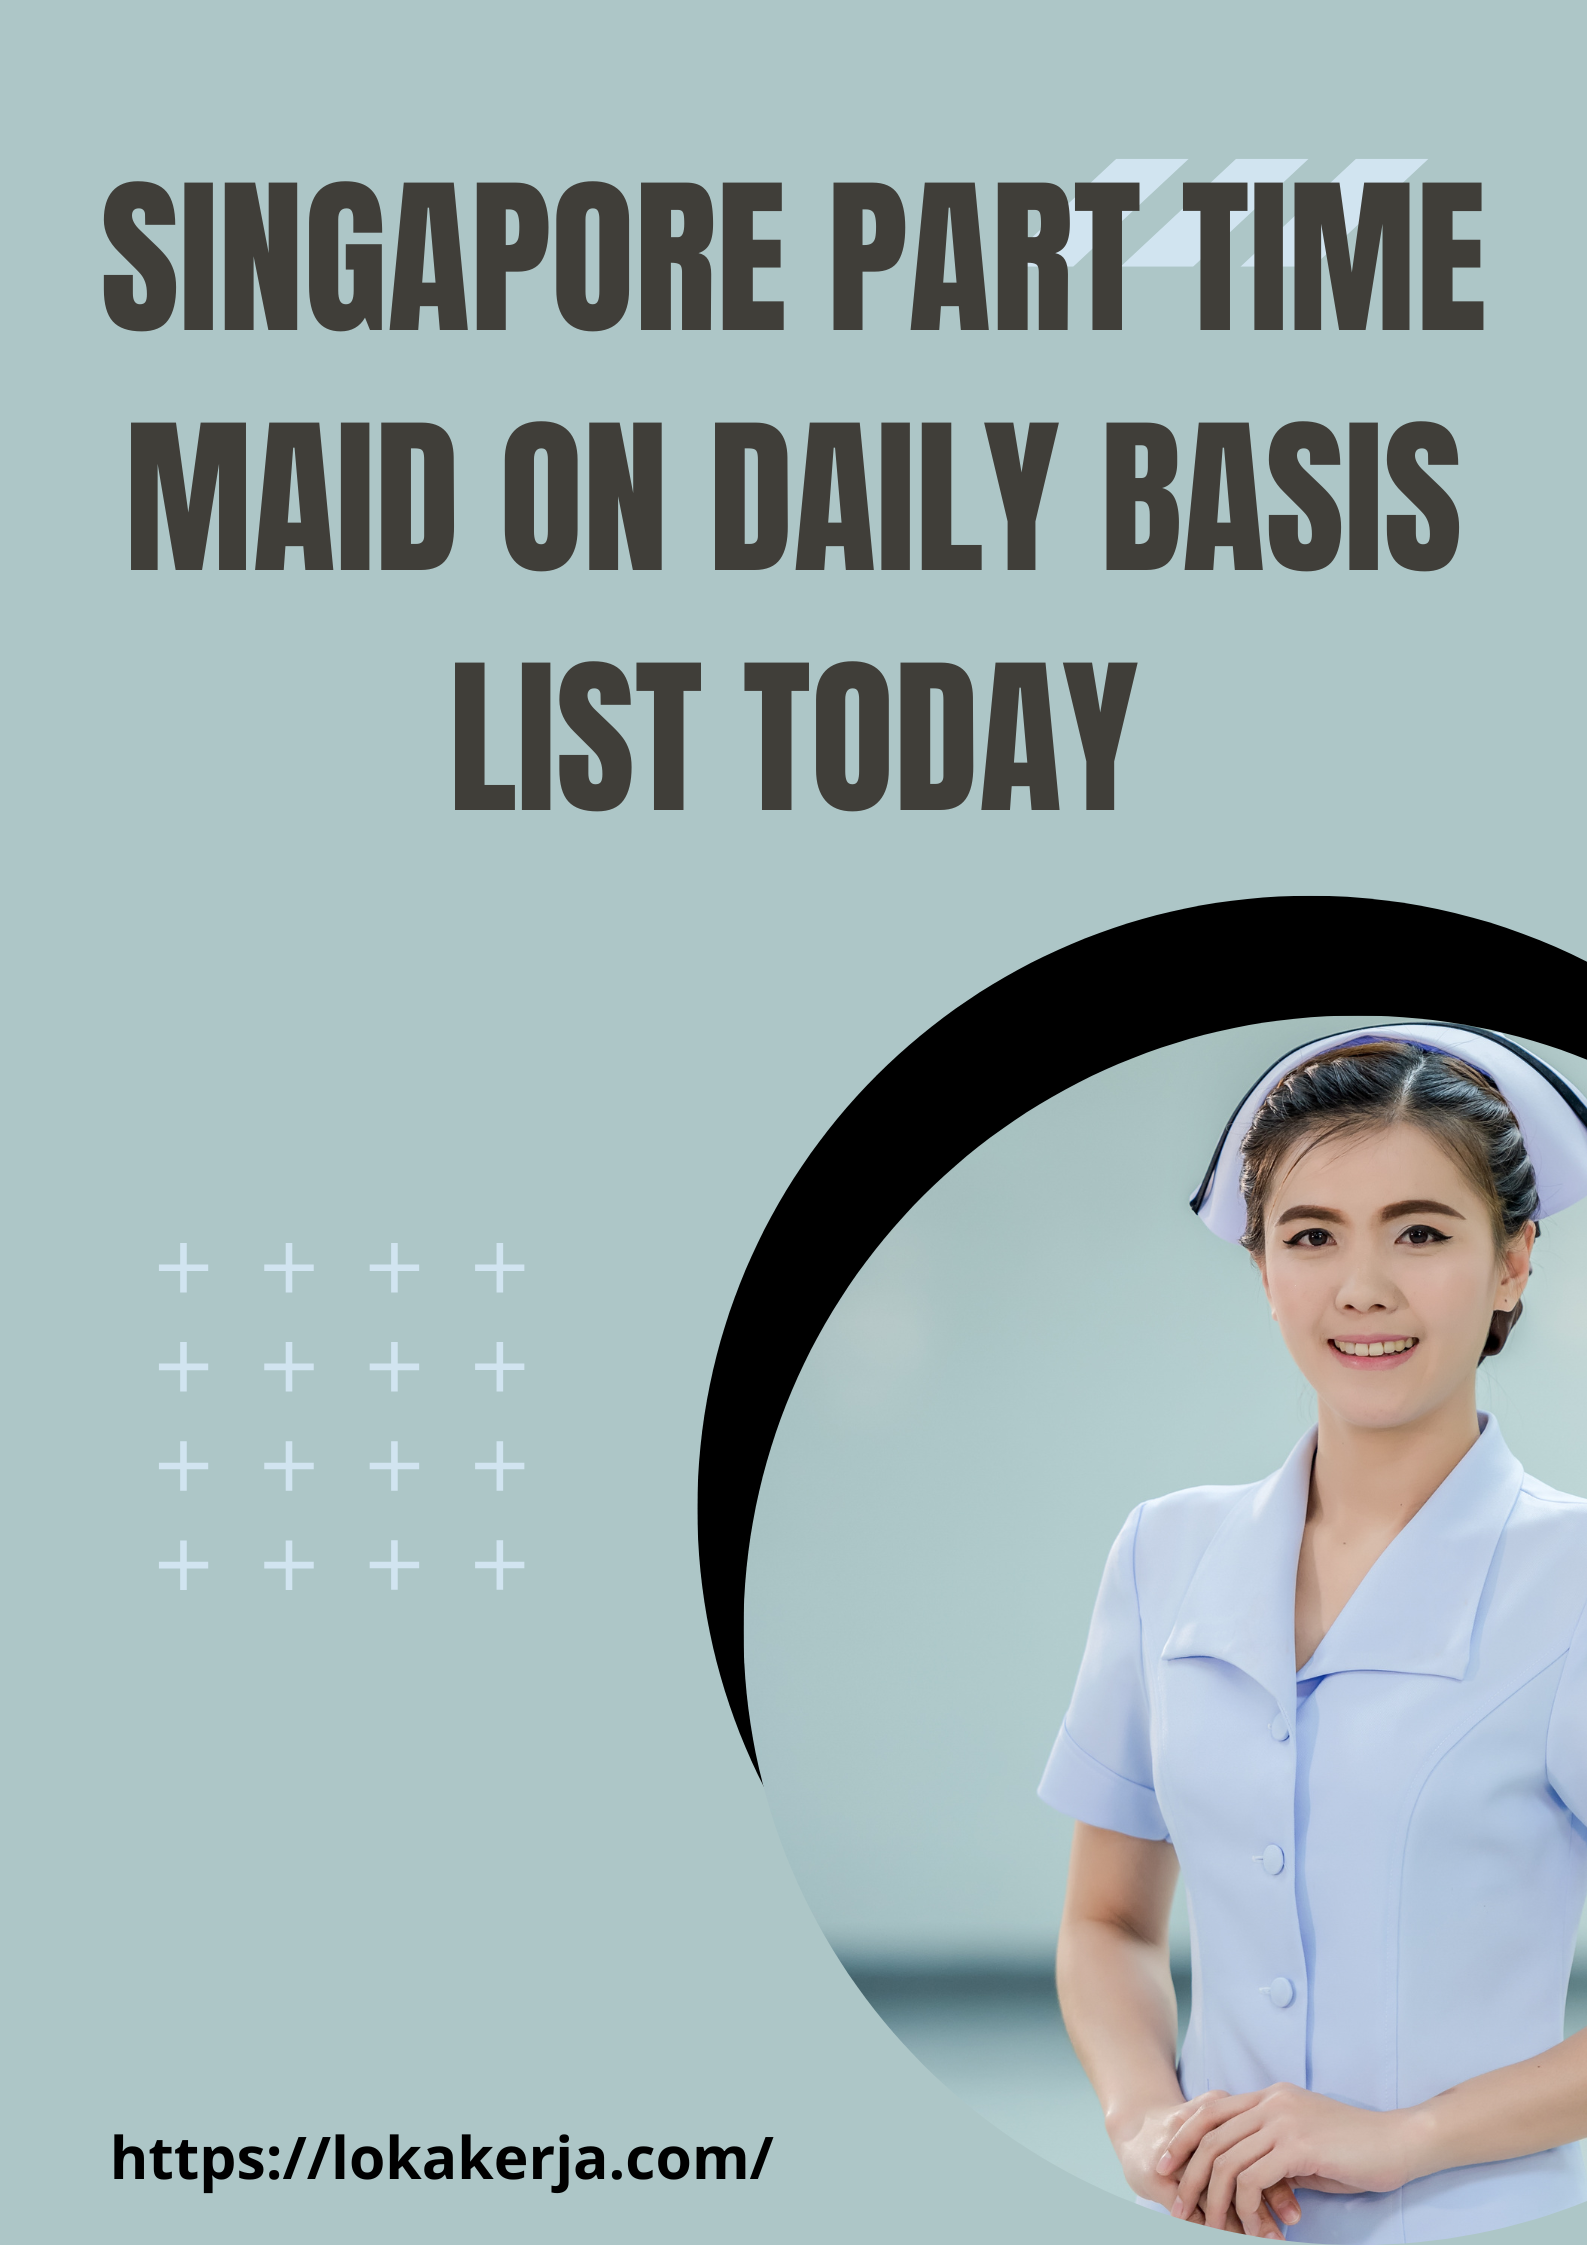 Singapore Part Time Maid On Daily Basis